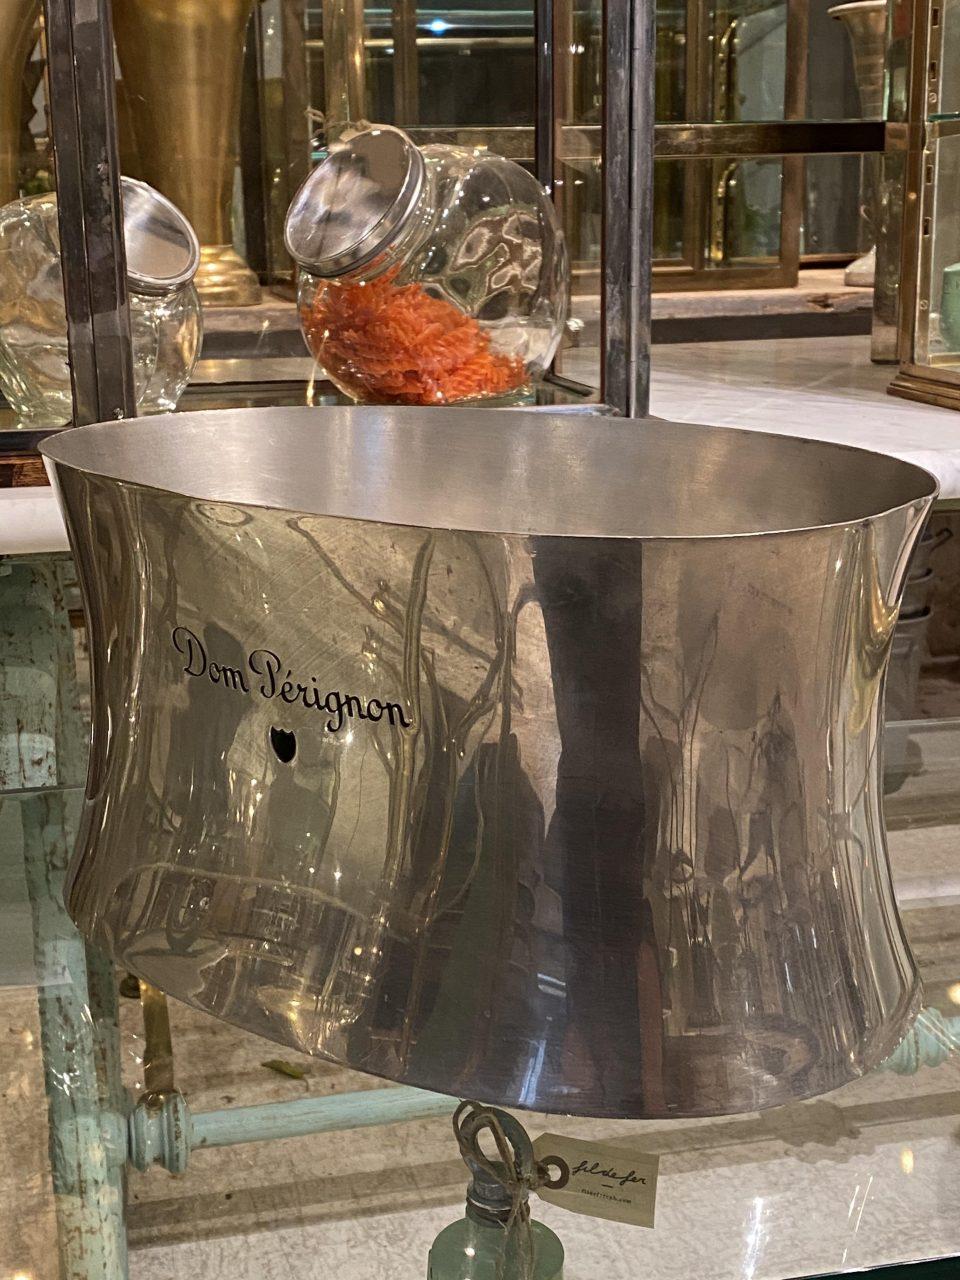 Handsome midcentury French champagne cooler/wine bucket, in a super beautiful oval shape with concave sides. Quality polished tin and has a nice name features on the side from Dom Pérignon.

Dom Pérignon is a famous and exclusive champagne brand